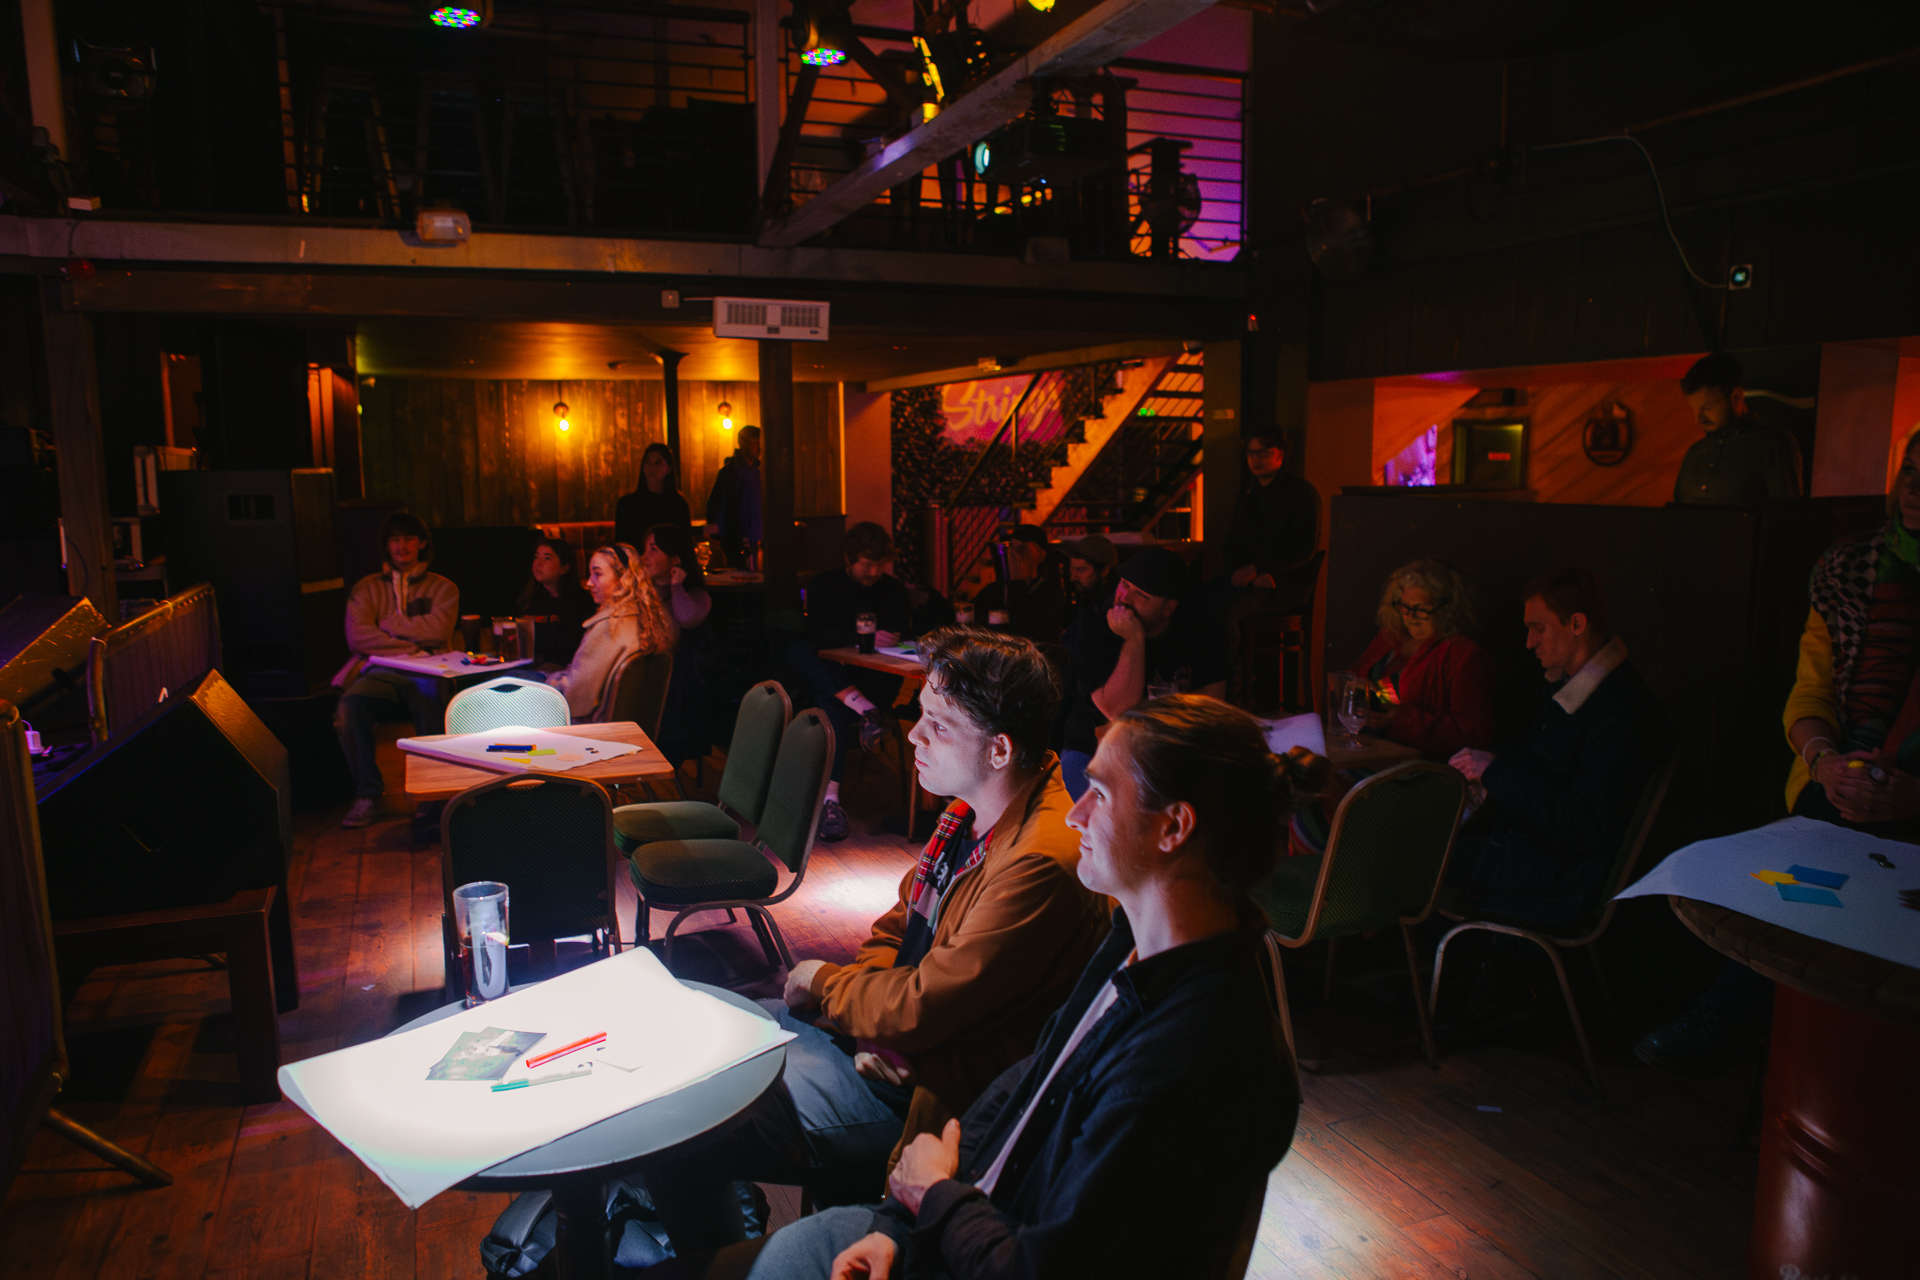 Students watching the stage at Future Works event at Strings Bar by David Rutherford